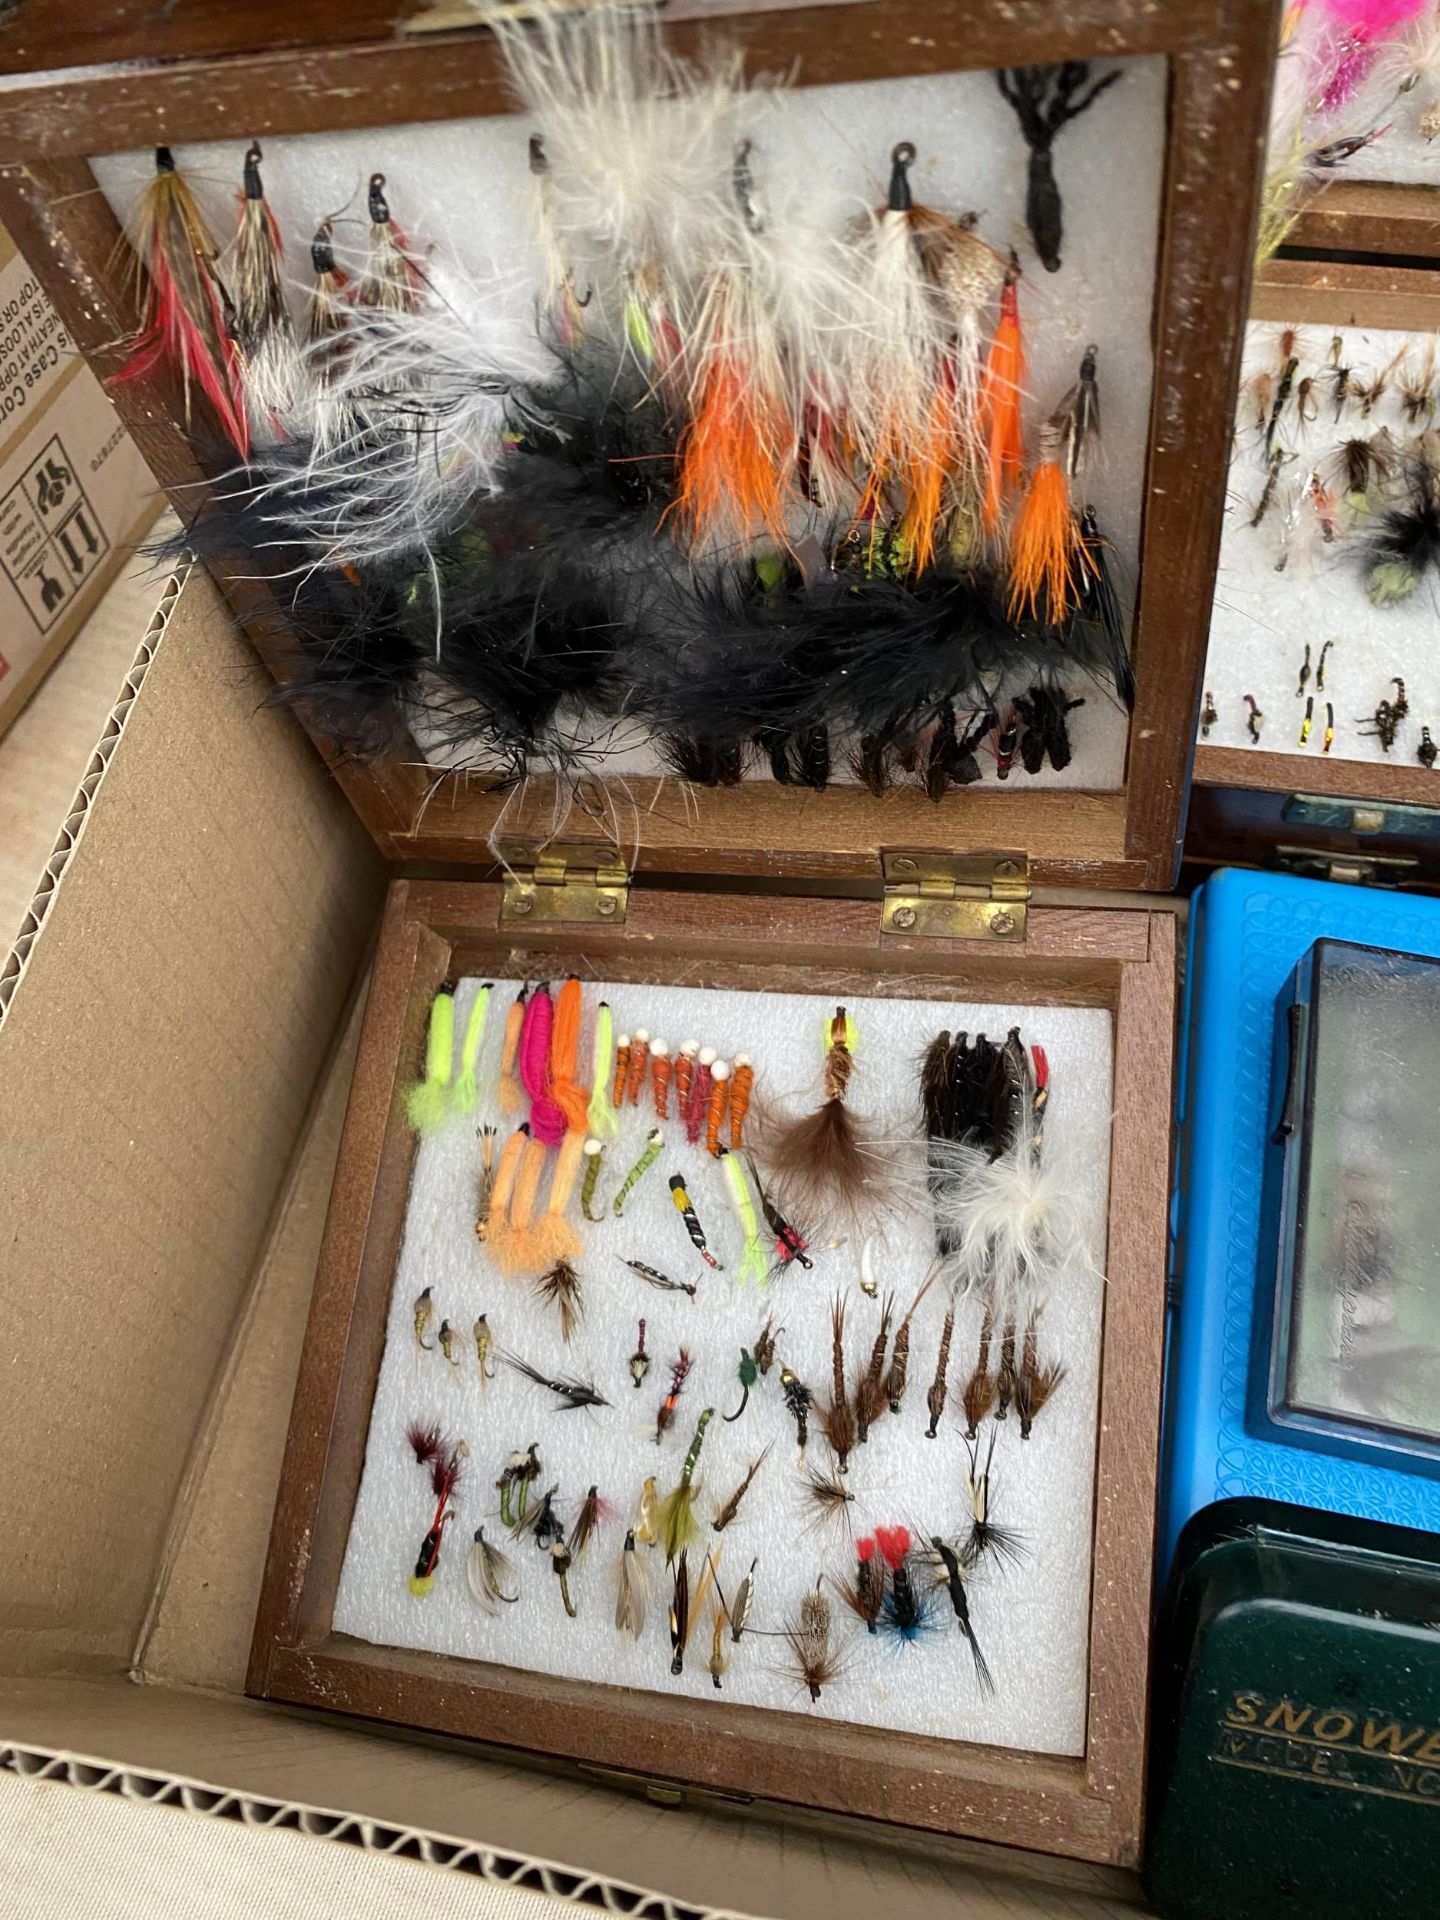 A LARGE SELECTION OF VARIOUS FISHING FLIES - Image 4 of 8